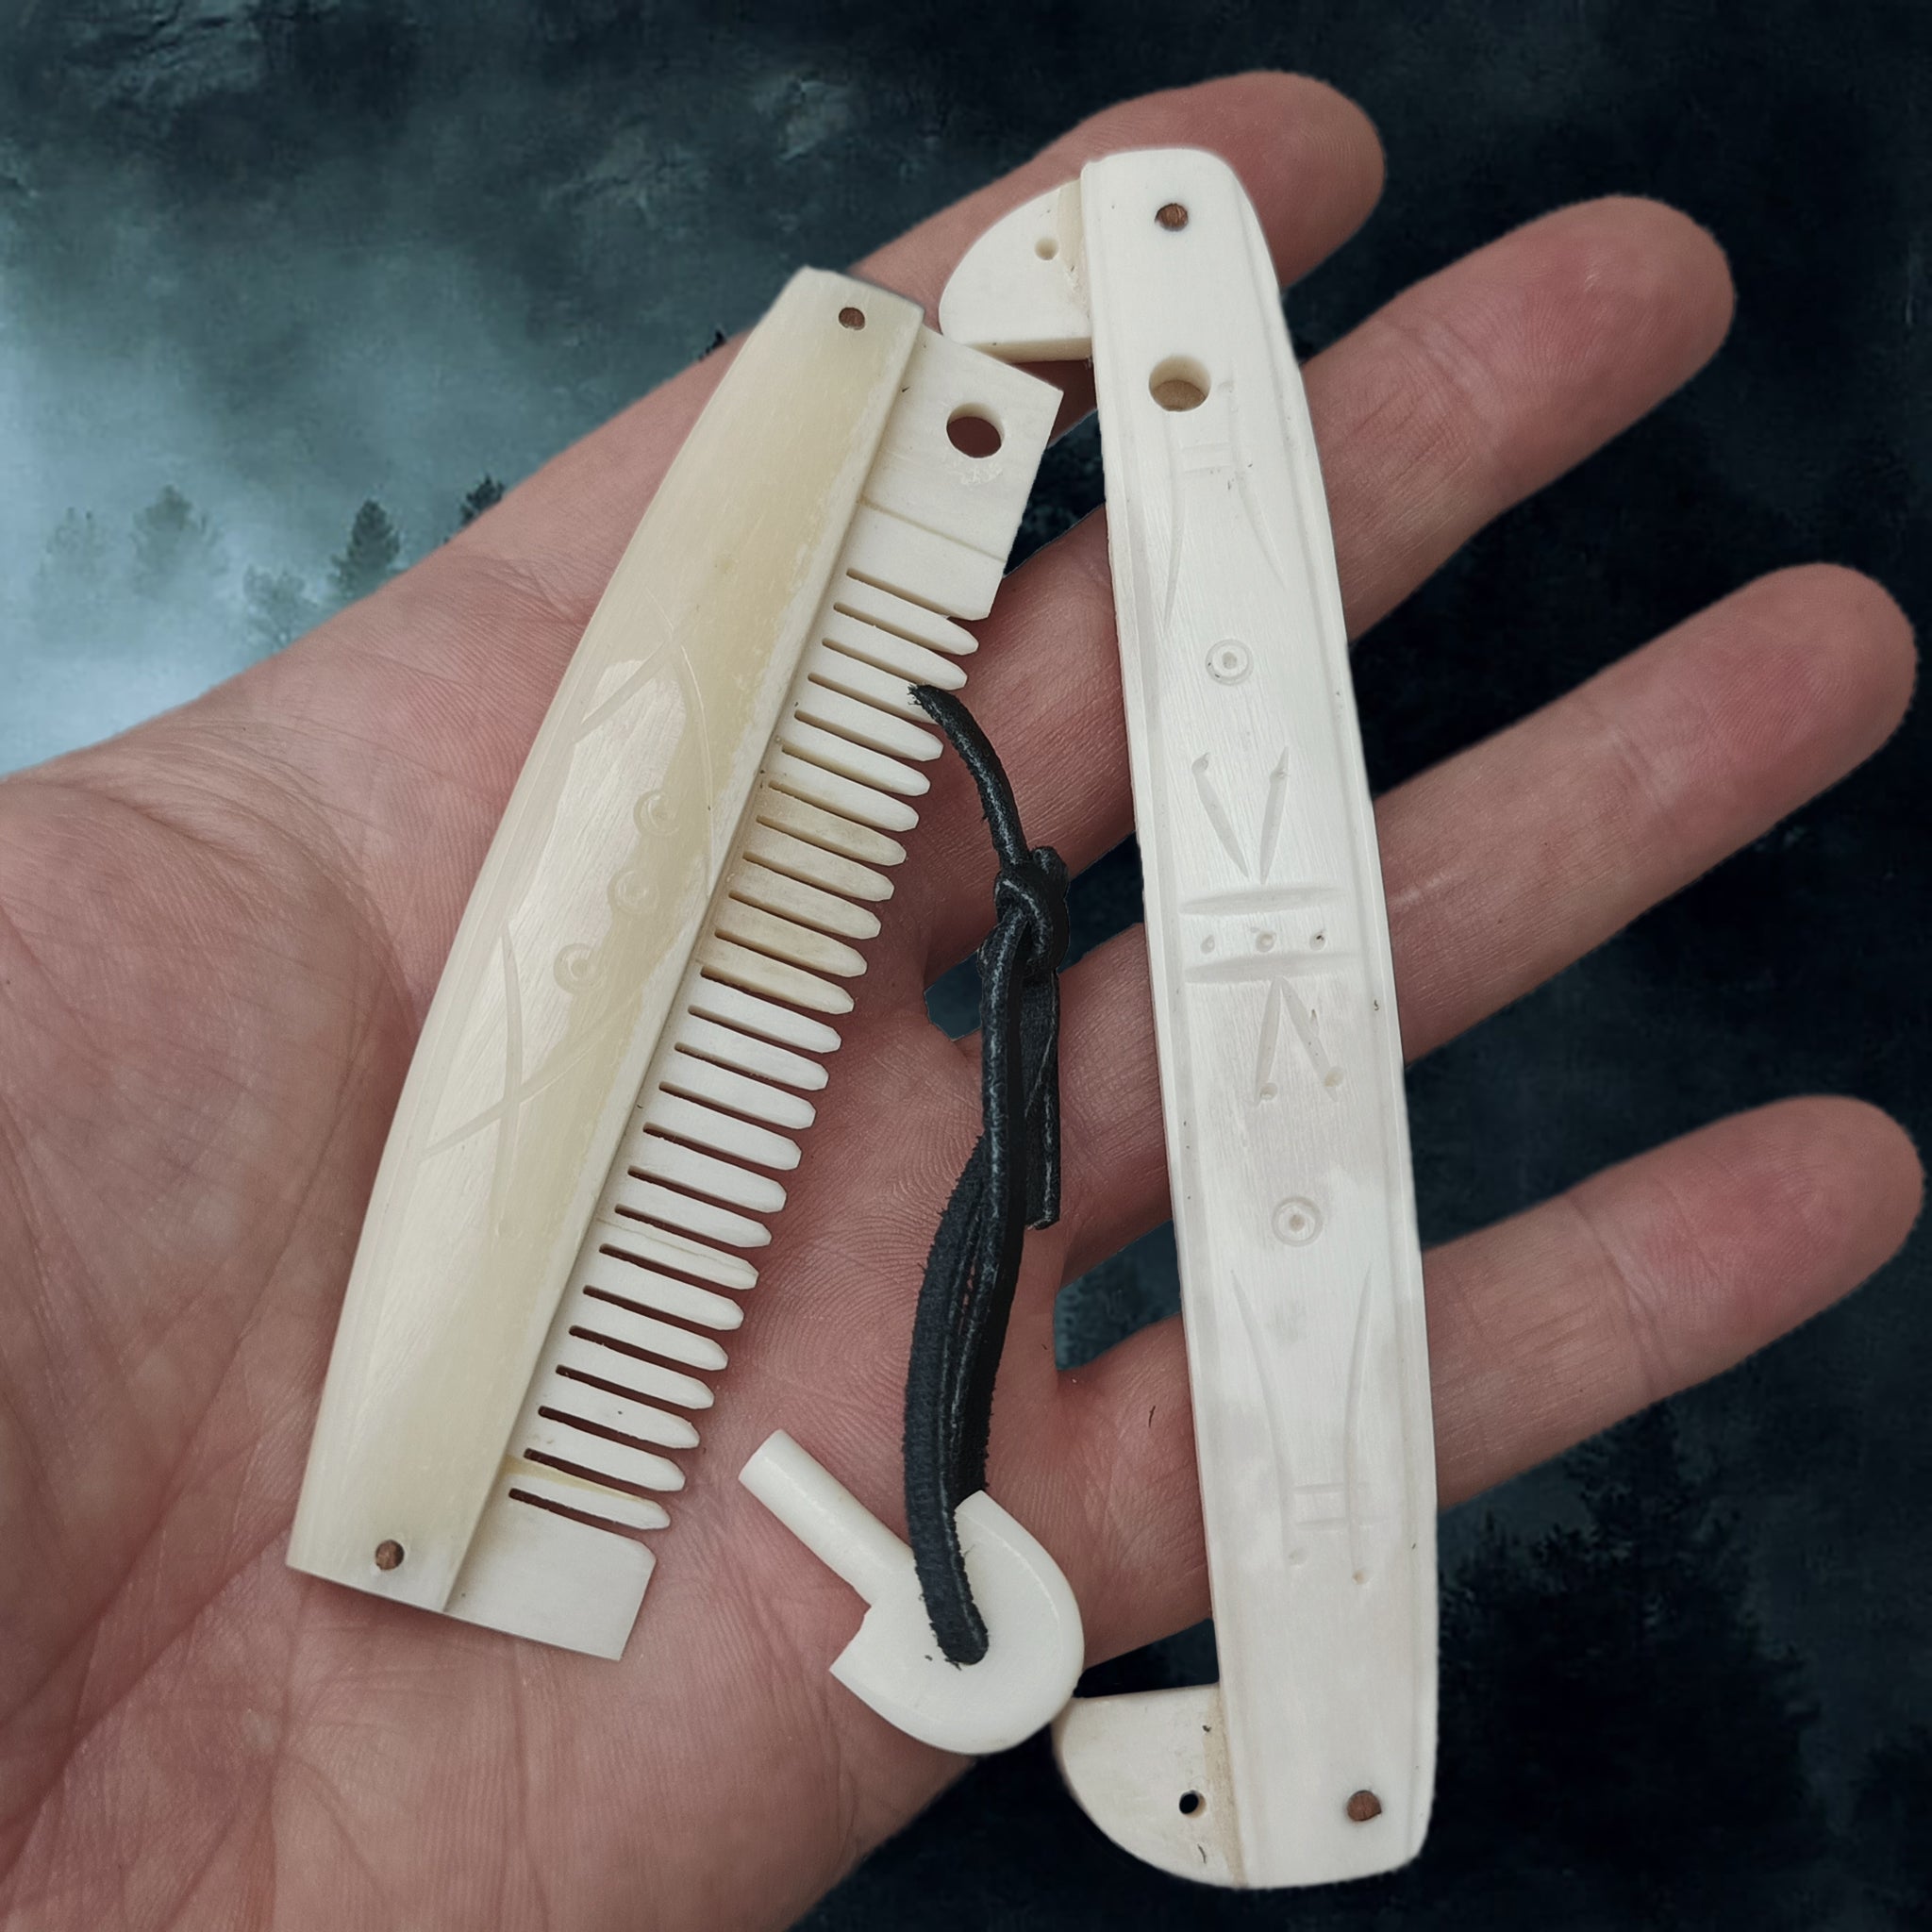 Encased Bone Viking Comb with Markings on Hand - Open